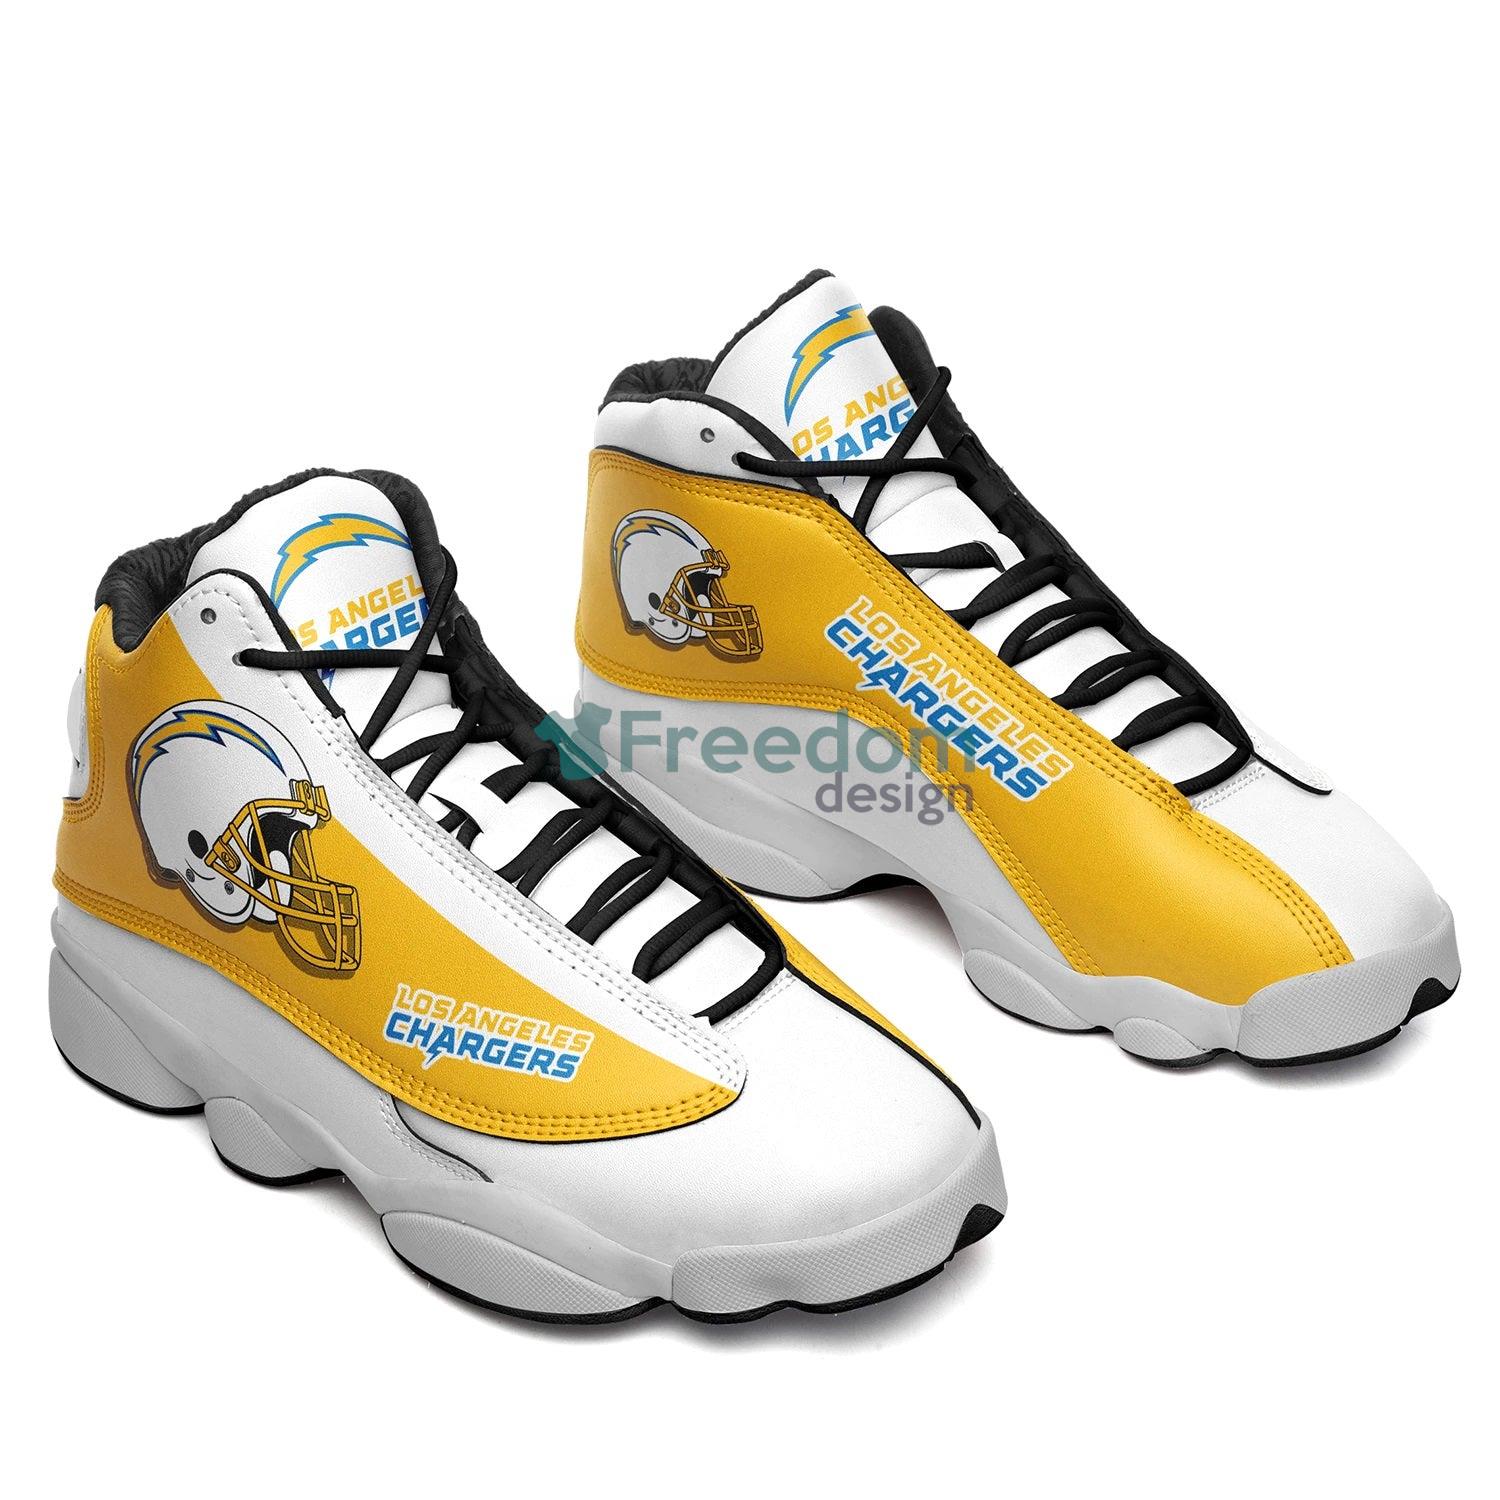 Los Angeles Chargers Team Air Jordan 13 Sneaker Shoes For Fans